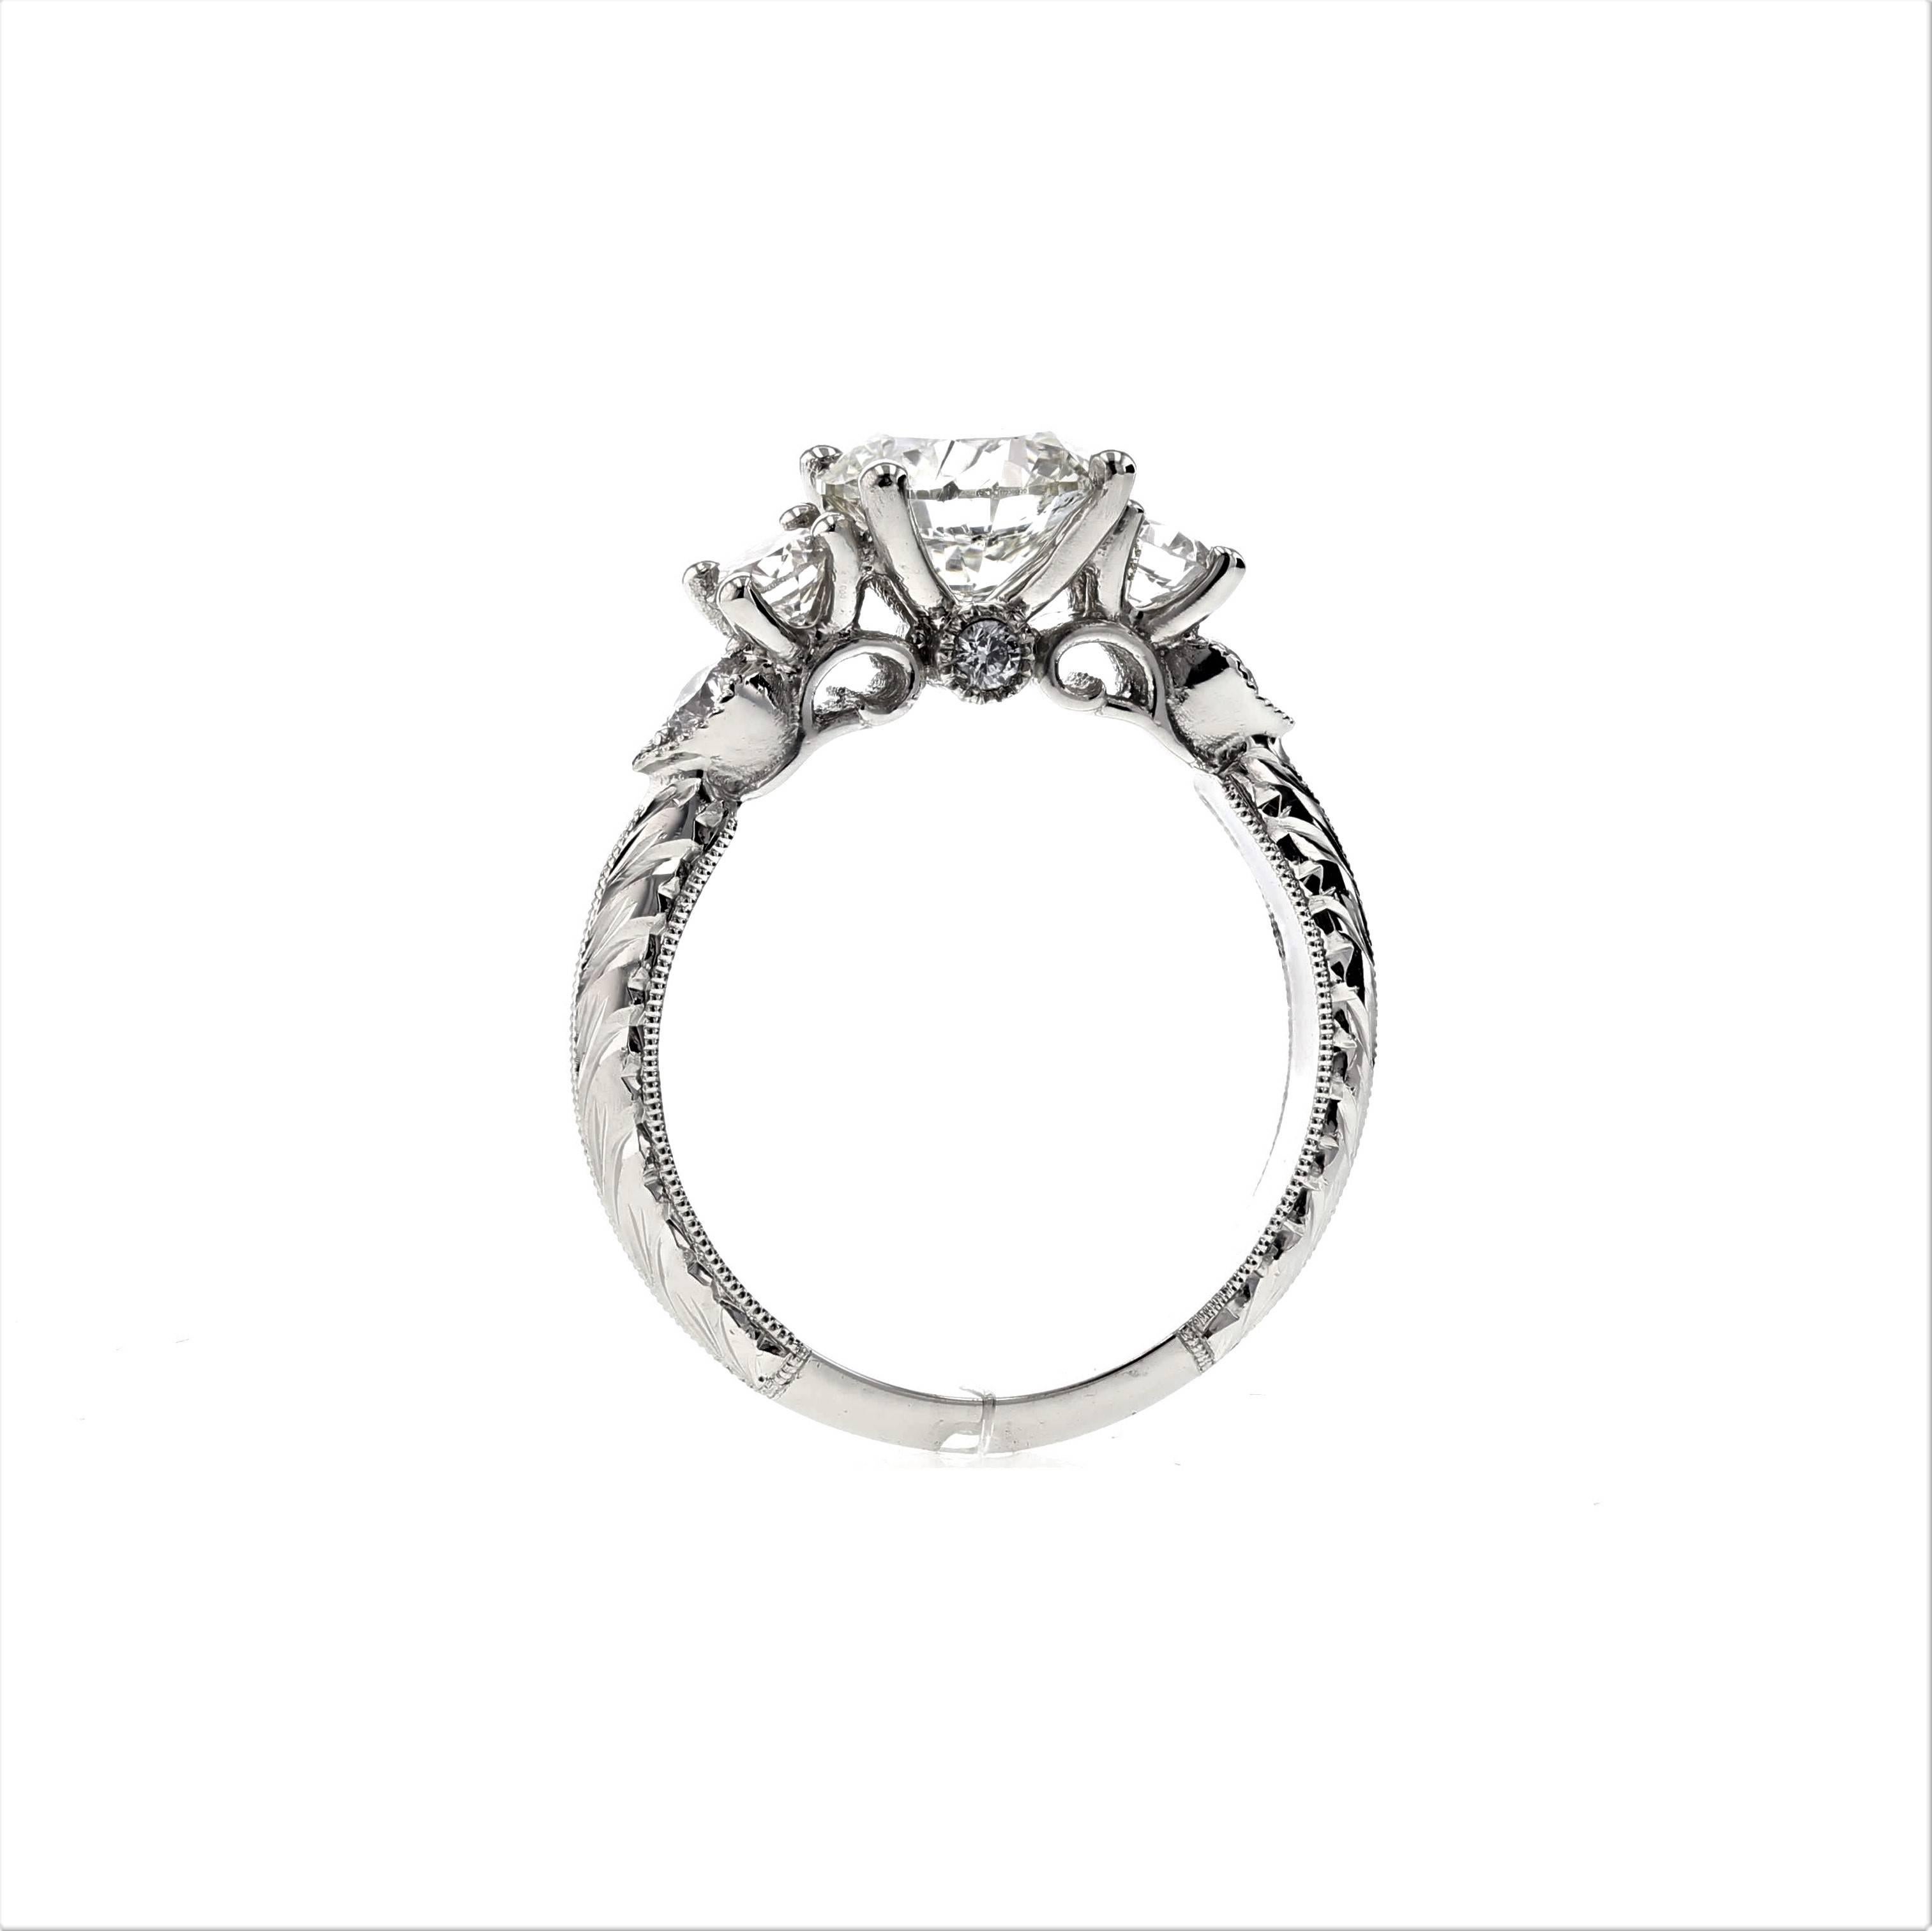 This stunning custom engagement ring incorporates seven diamonds and an intricate setting in platinum. Using embellishments such as engraving, bezels and a knife edge, this ring is a masterpiece and timeless in its beauty. It’s one of our favorites.